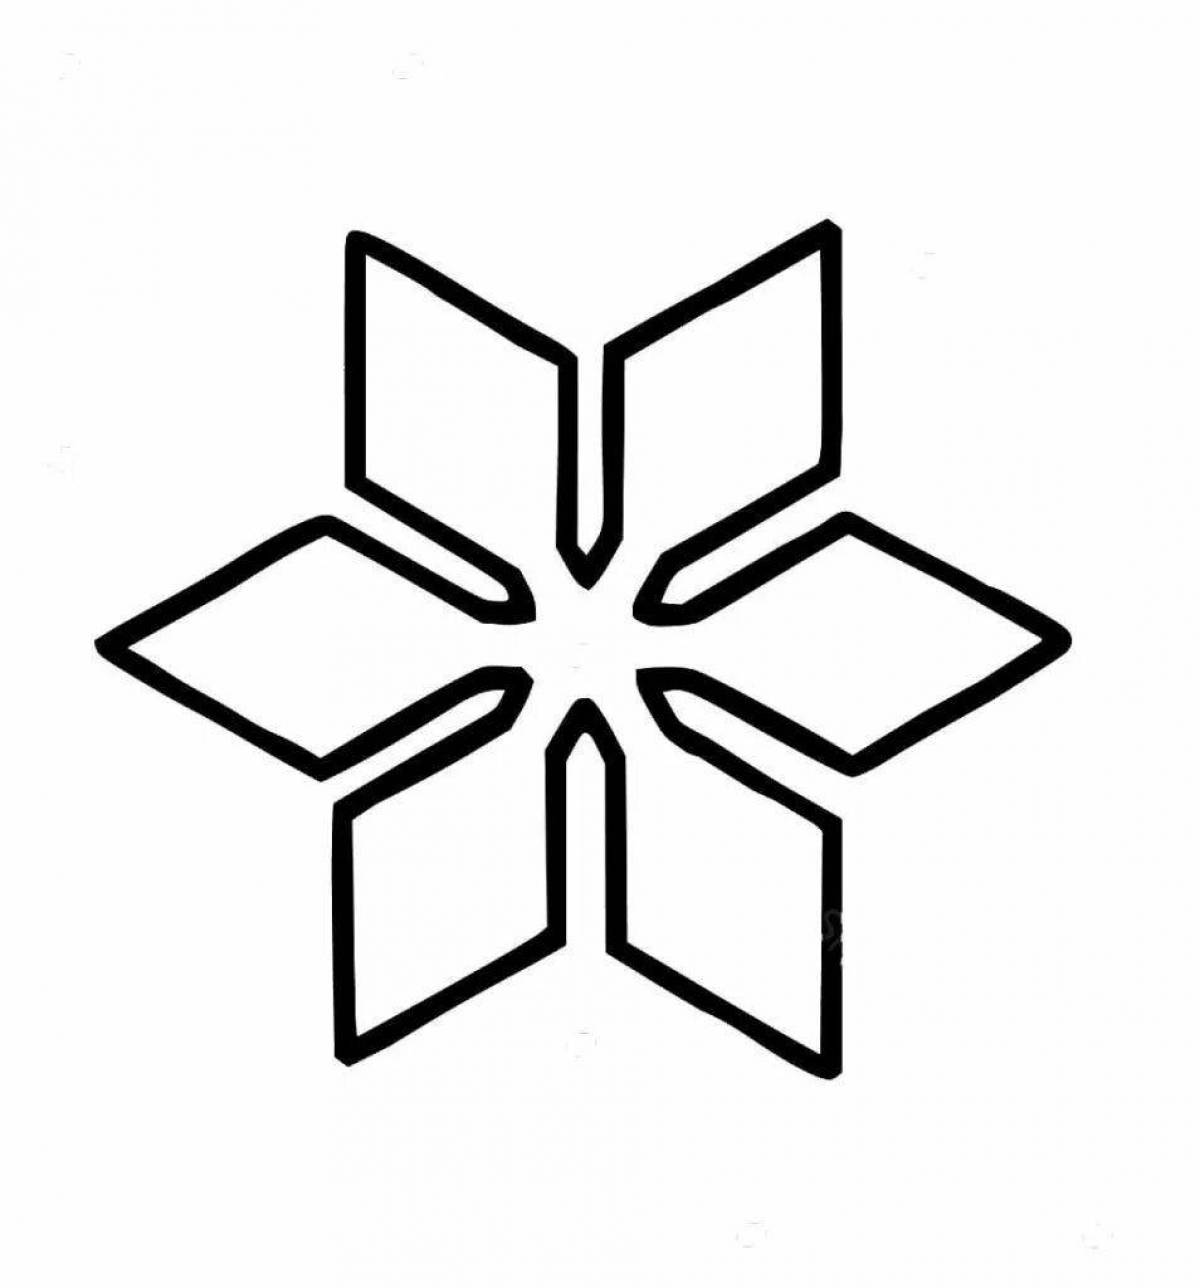 Glowing snowflake coloring pages for kids 4-5 years old